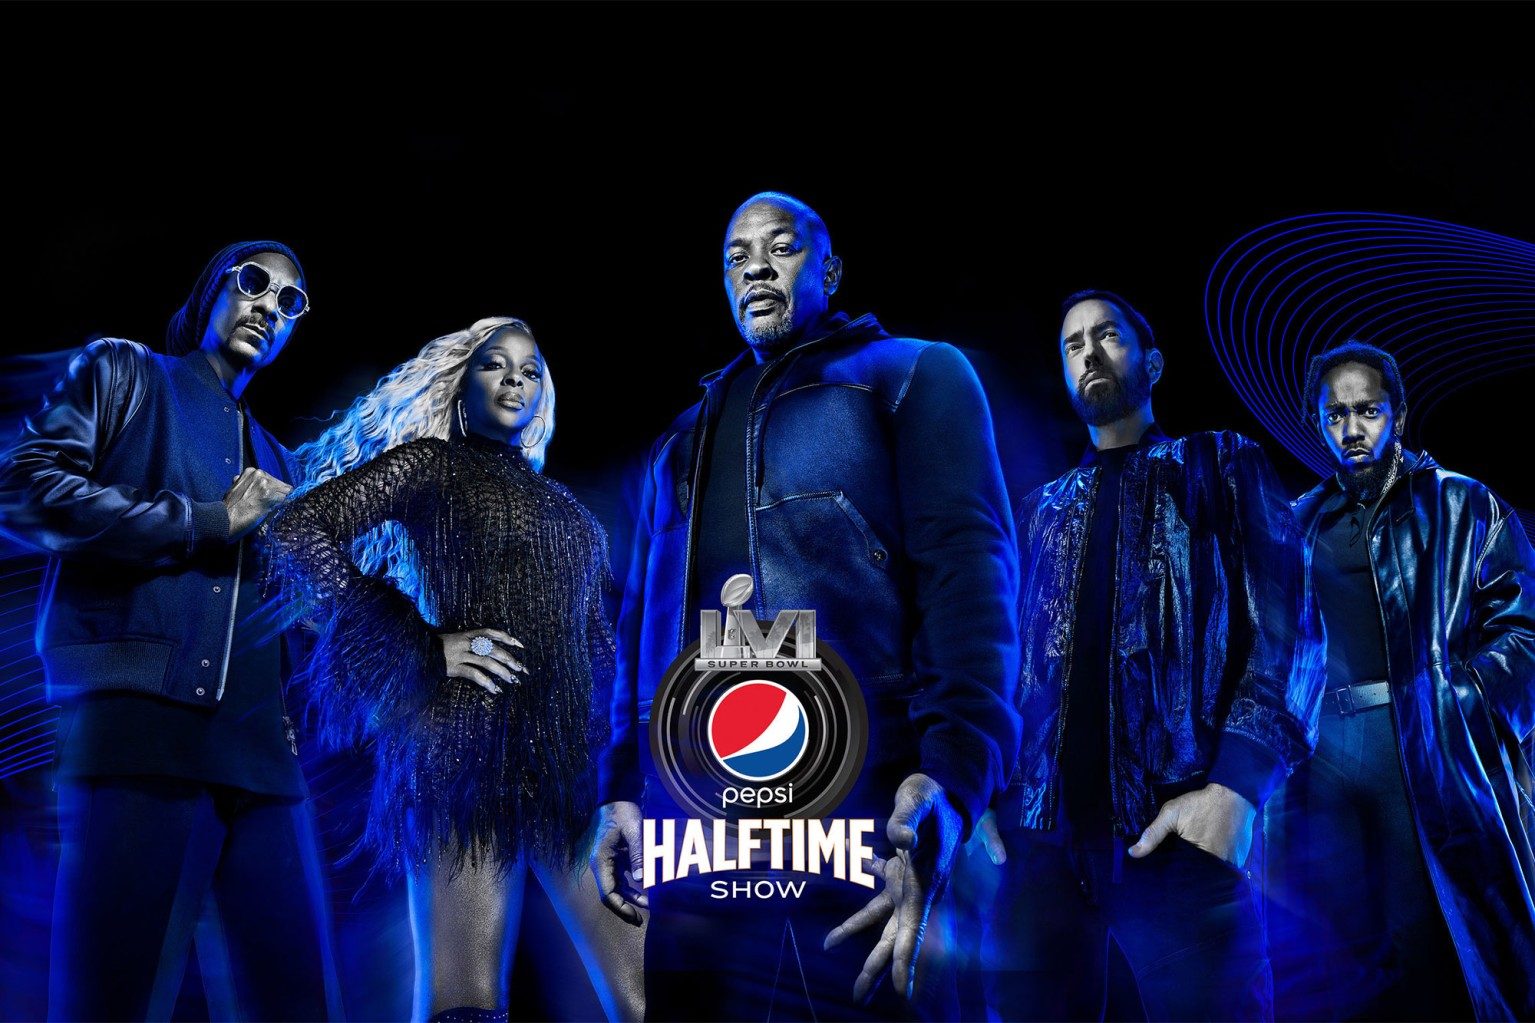 Most Epic Super Bowl 2022 Halftime Show Trailer Is Out